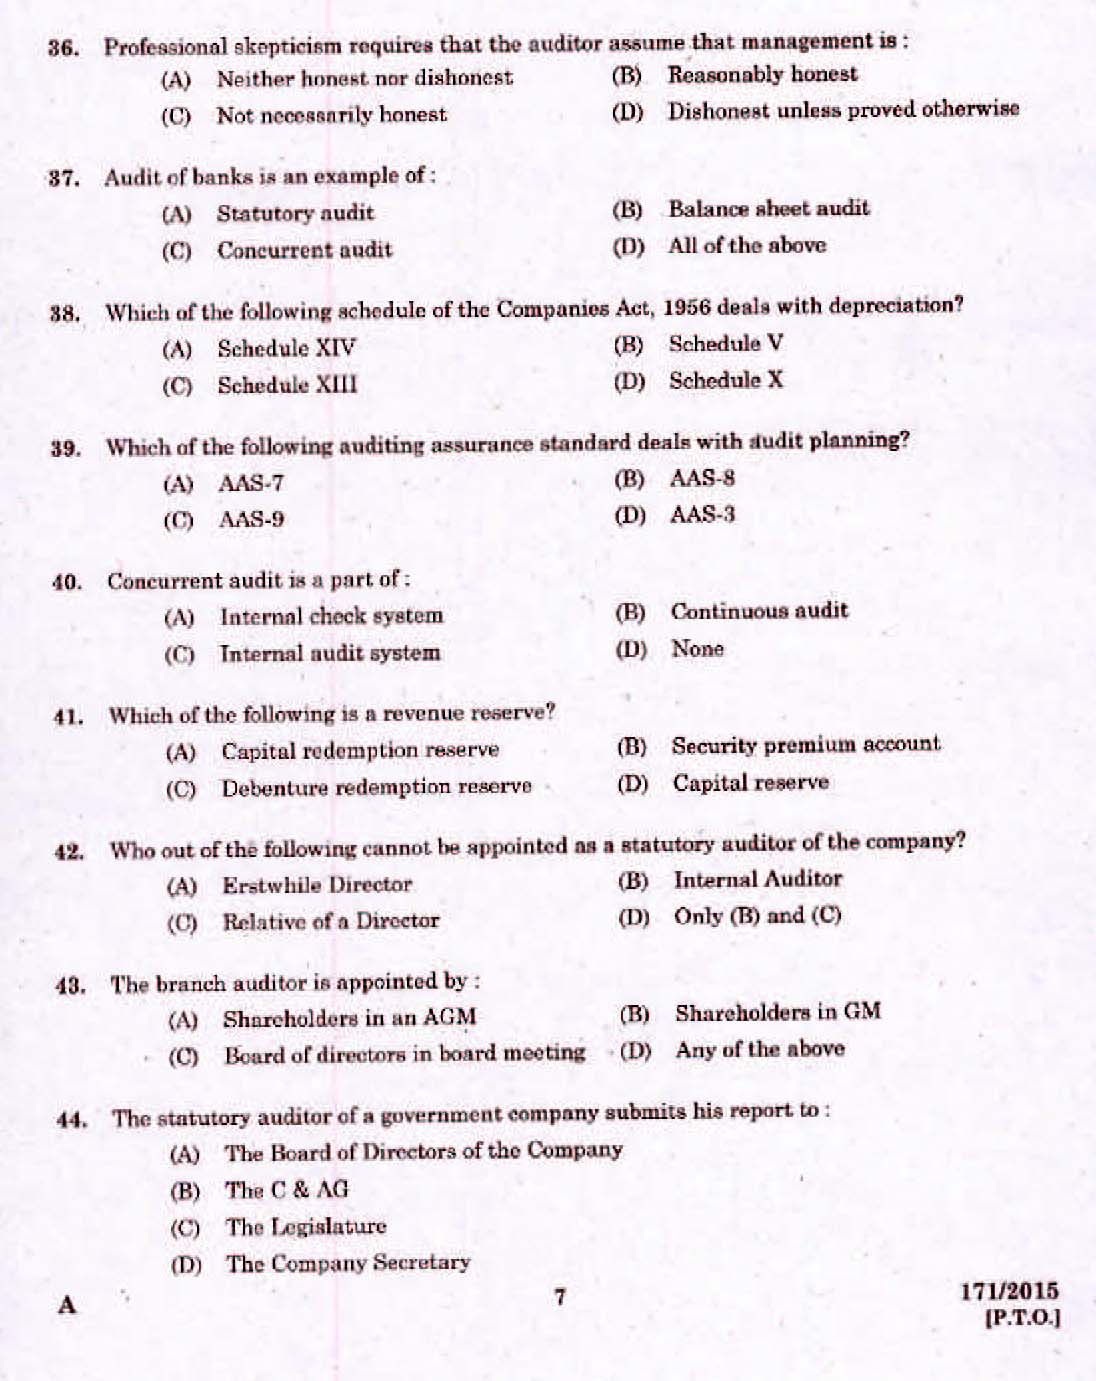 Kerala PSC Lower Division Accountant OMR Exam 2015 Question Paper Code 1712015 5